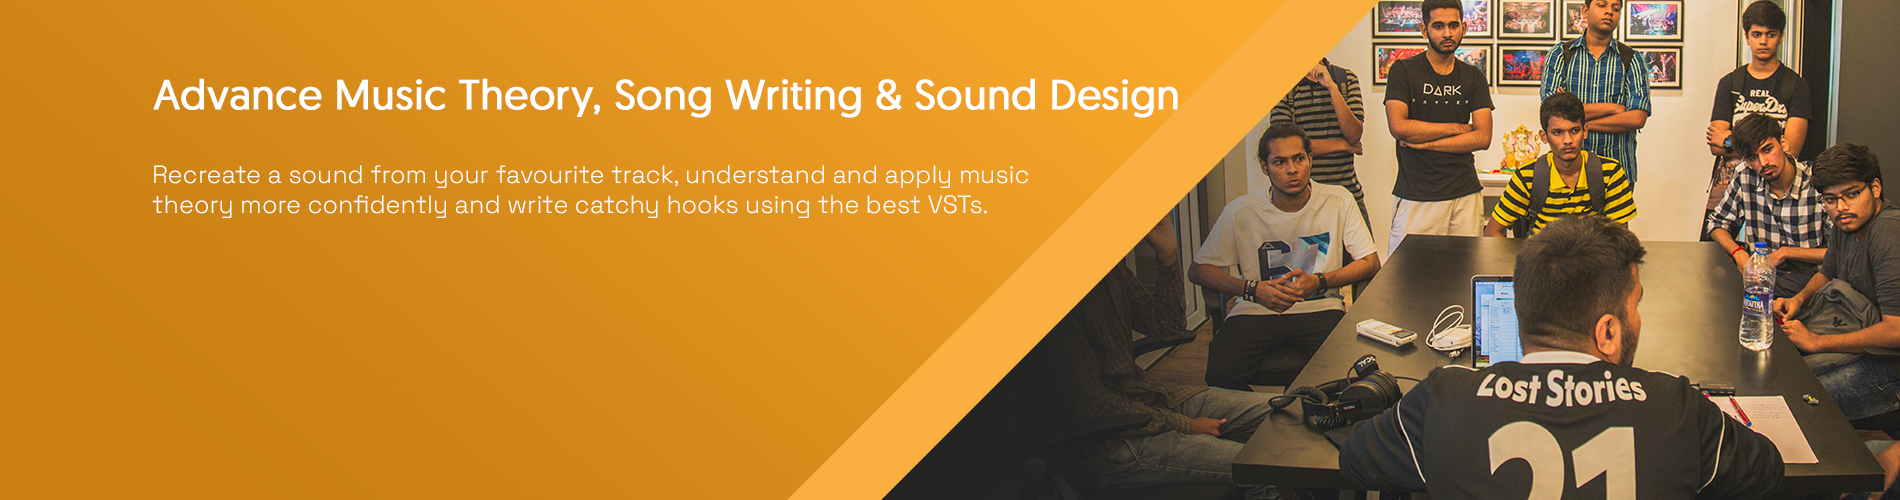 Advance-Music-Theory-Song-Writing-Sound-Design-Offline